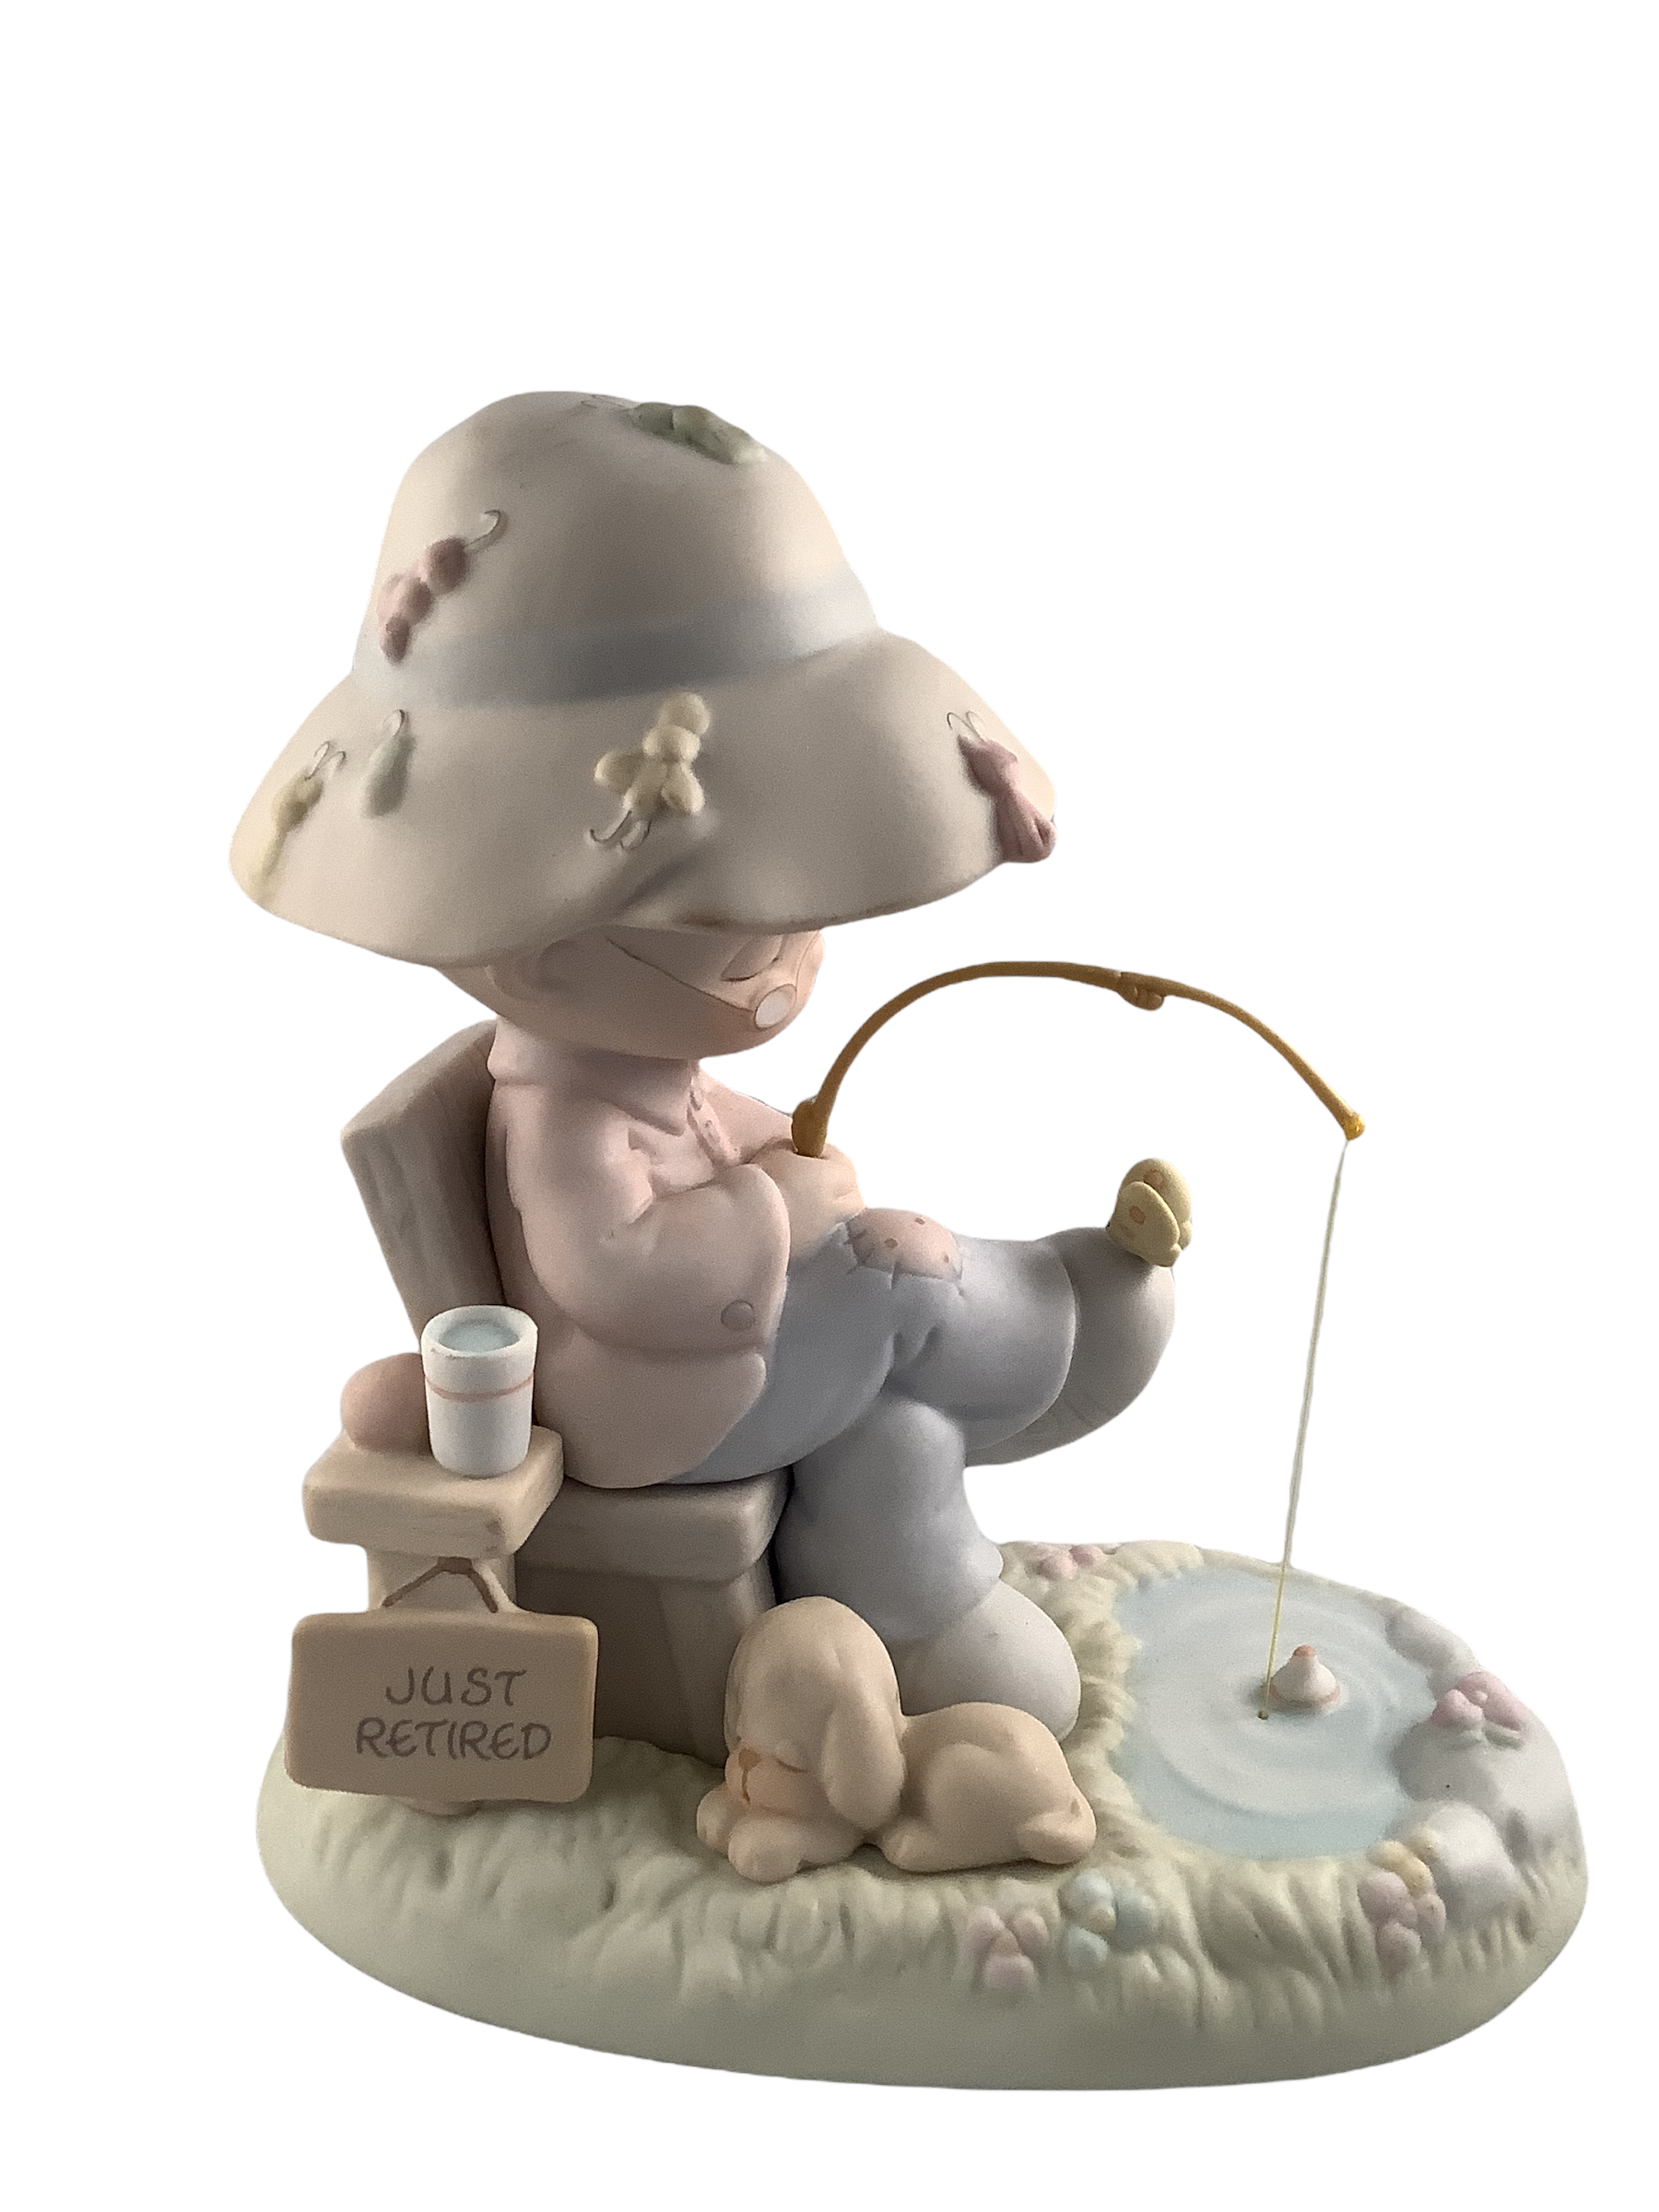 Just A Line To Say Your Special - Precious Moments Figurine 522864